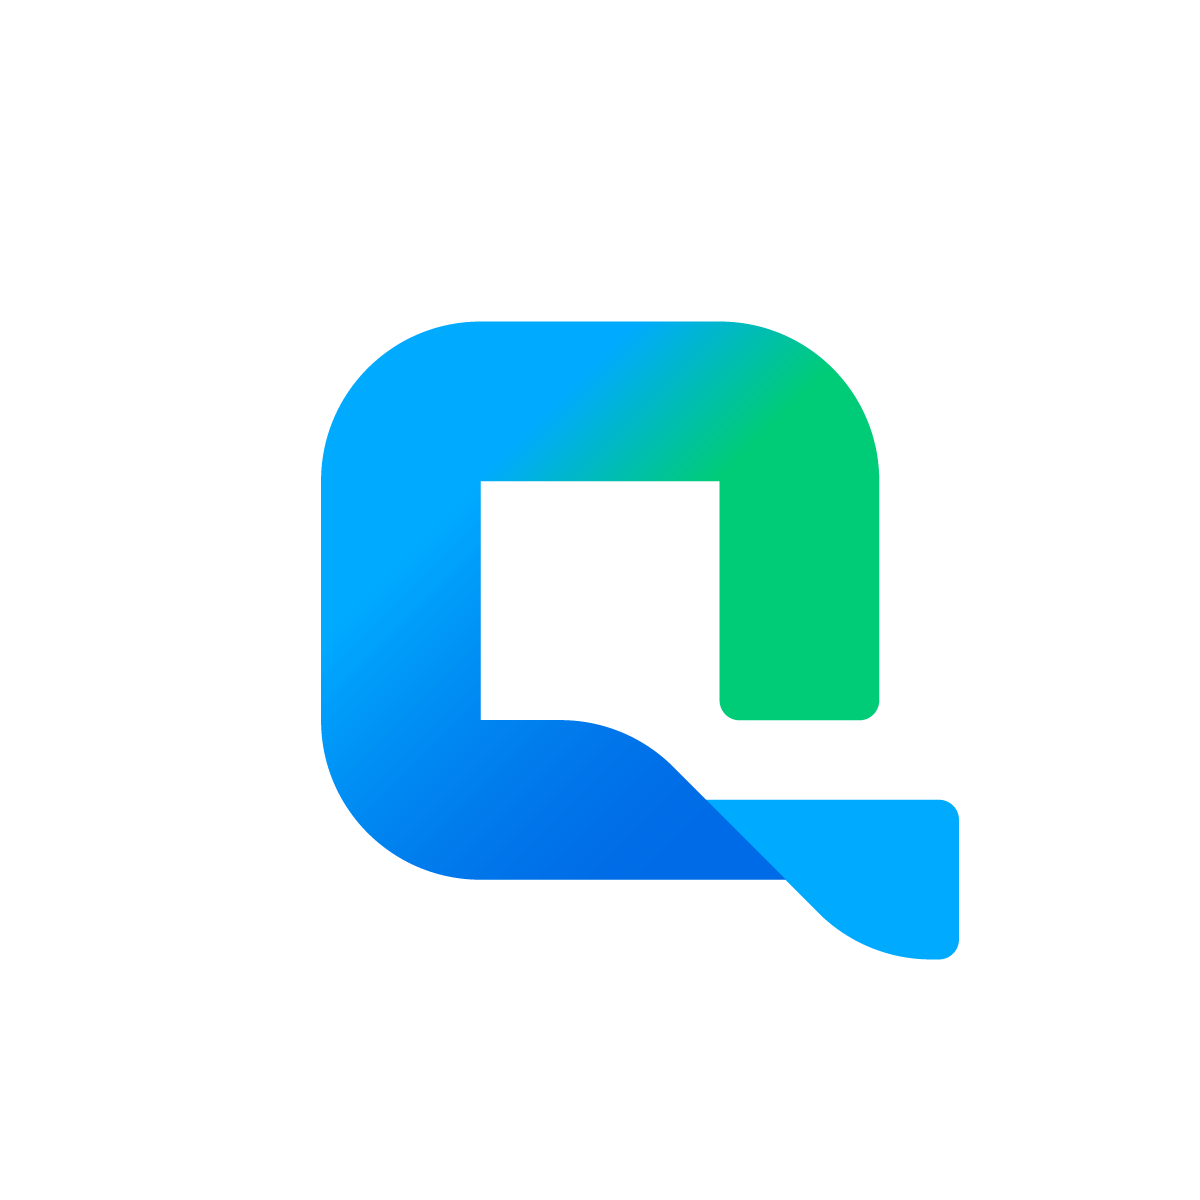 Abstract Q Square Logo: Rounded square shape resembling letter Q with twisted element